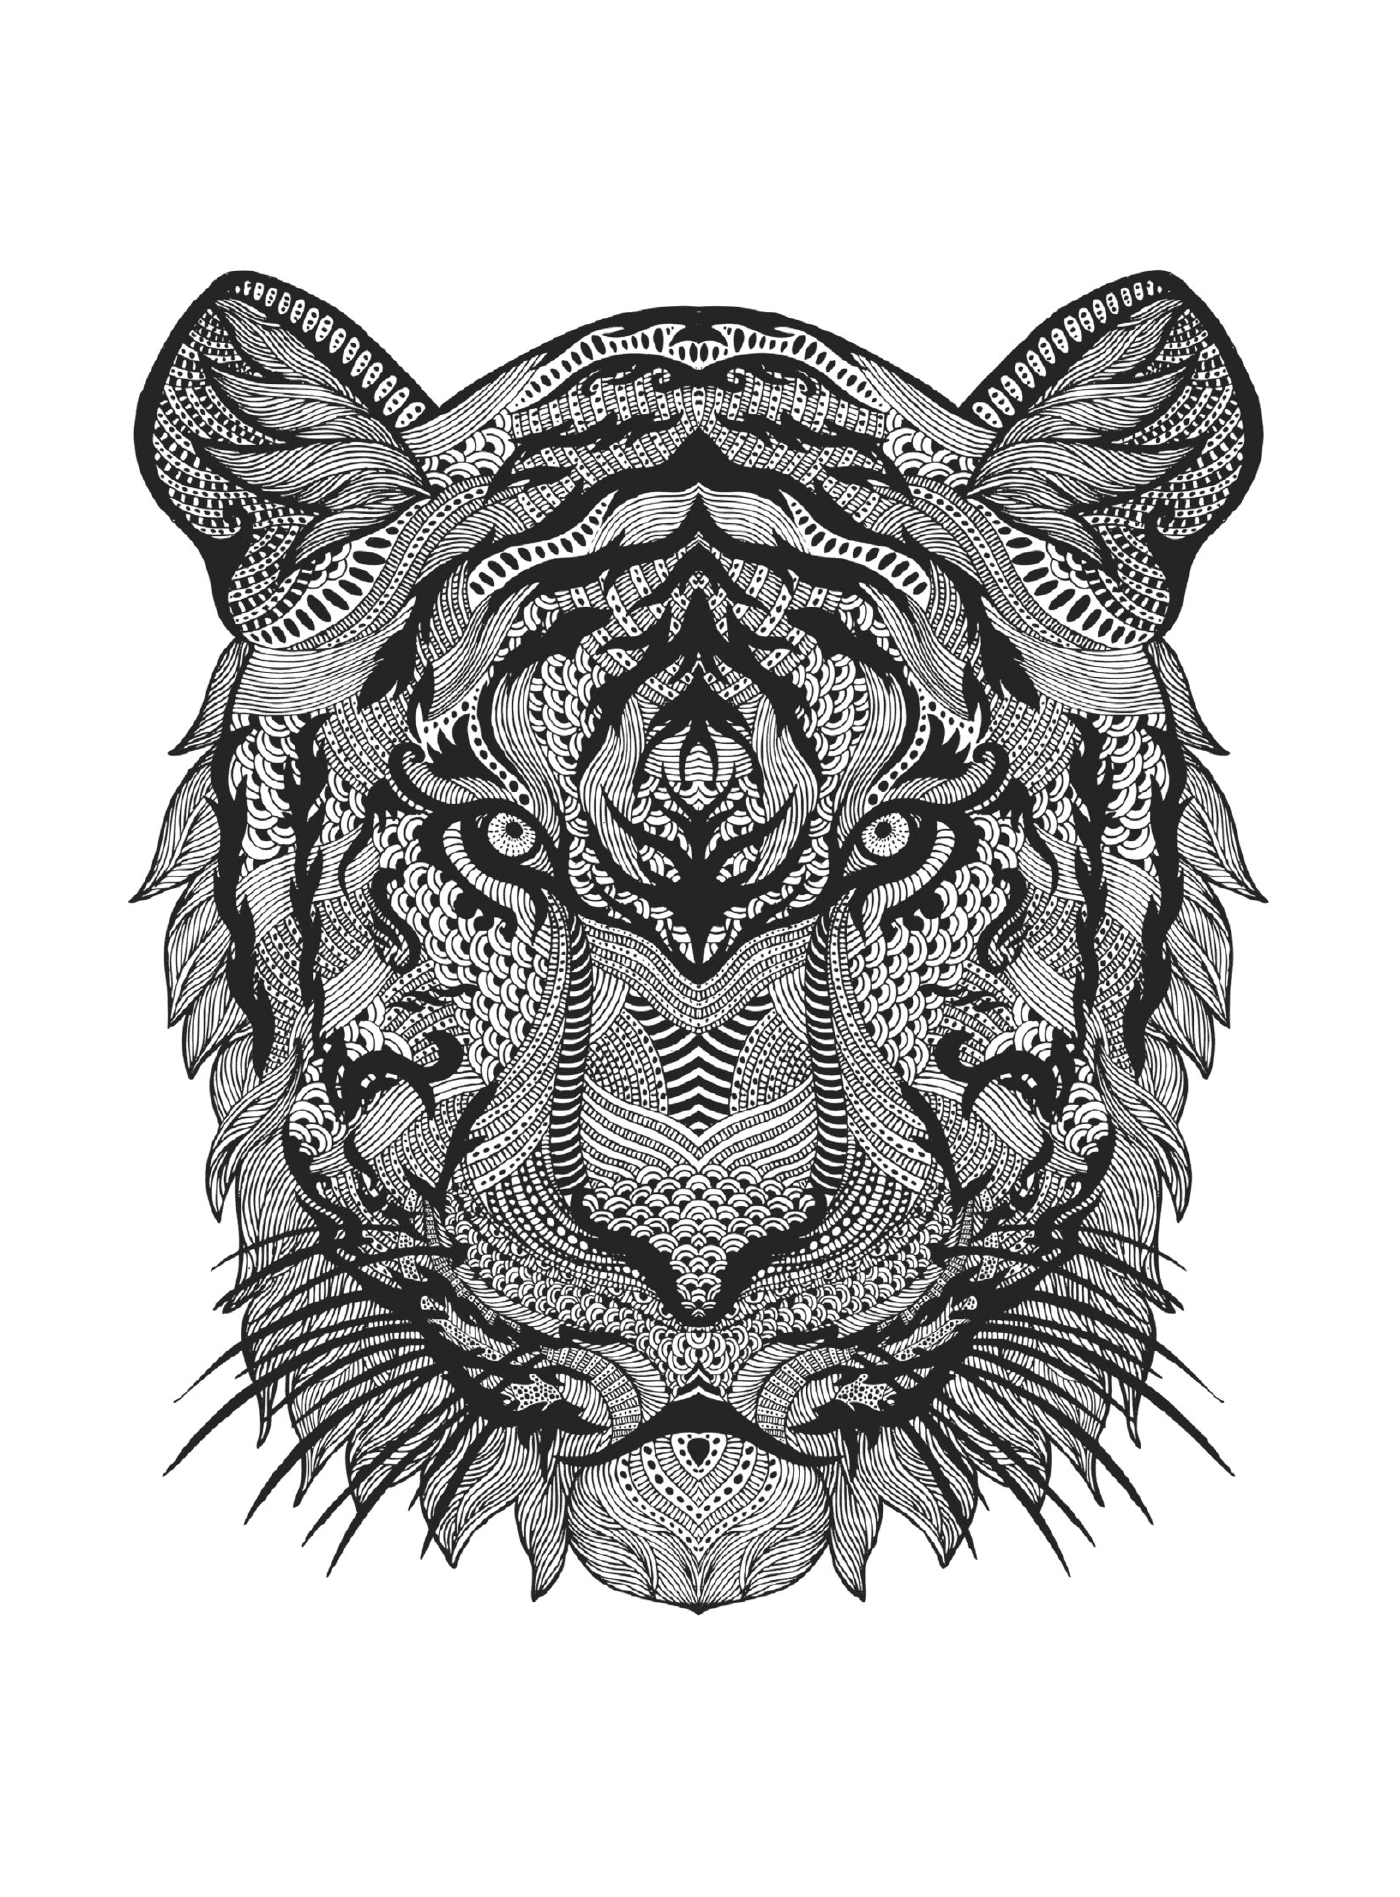  The head of a tiger 